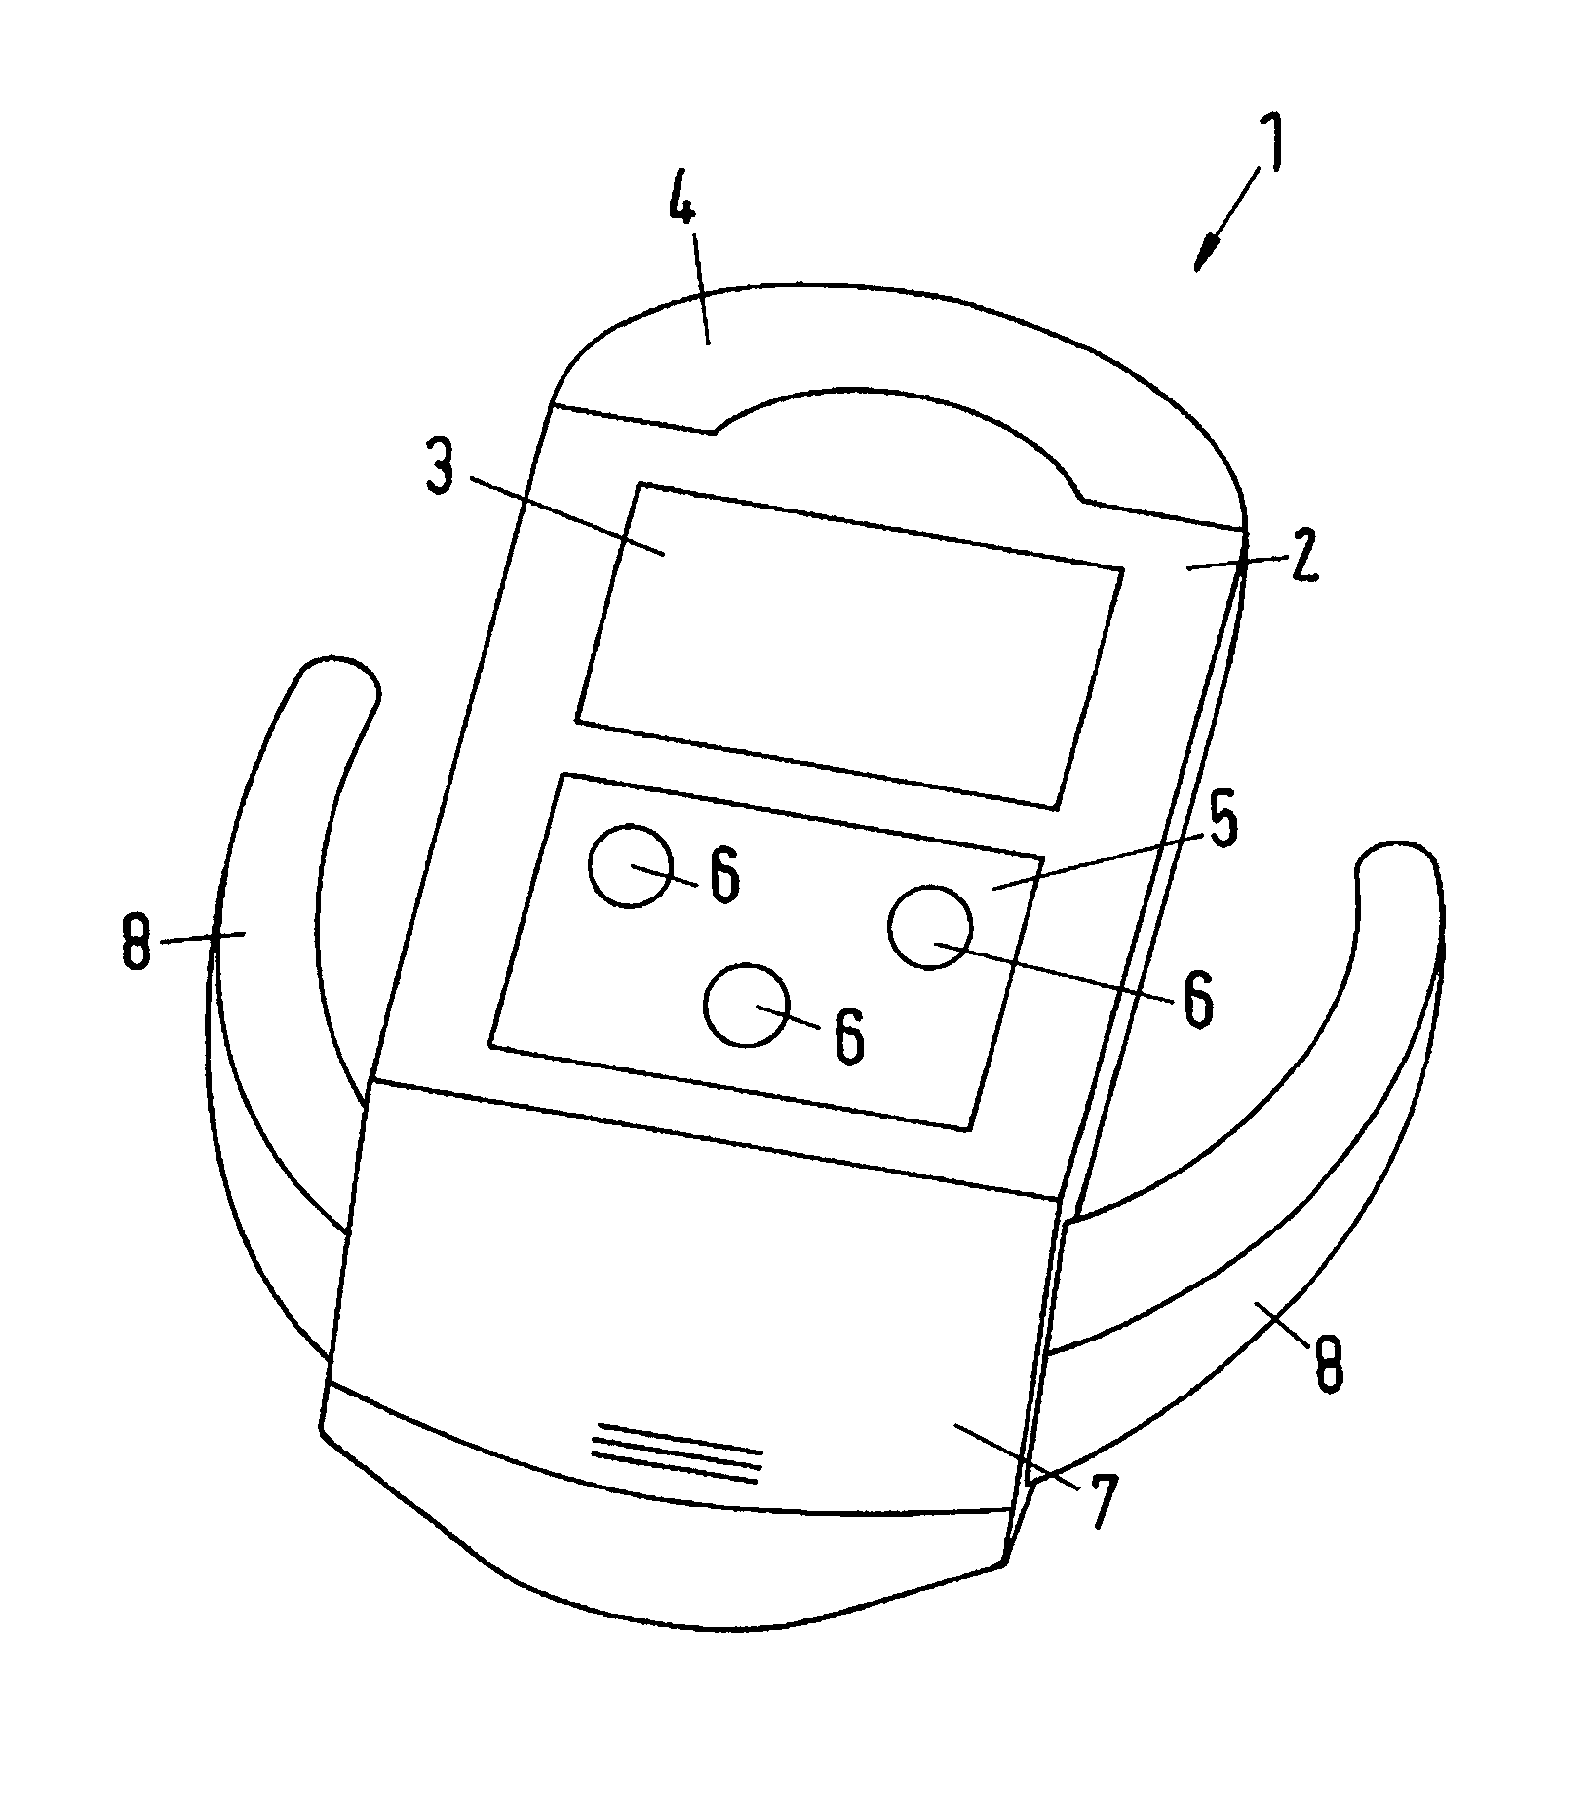 Pressure detection system for a pressure cooker indicating use-related wear